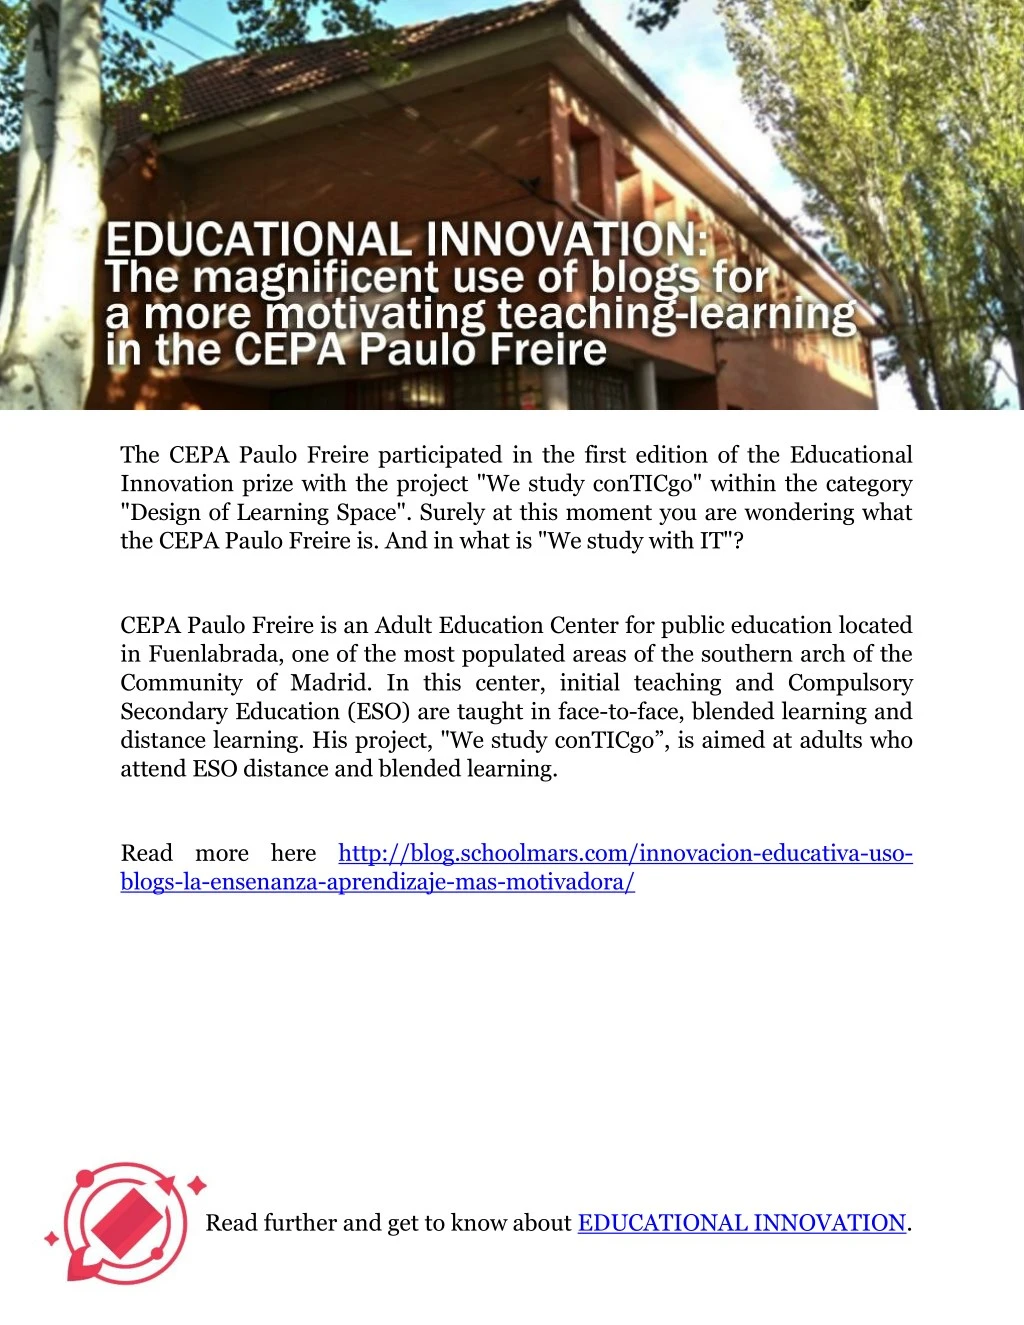 the cepa paulo freire participated in the first